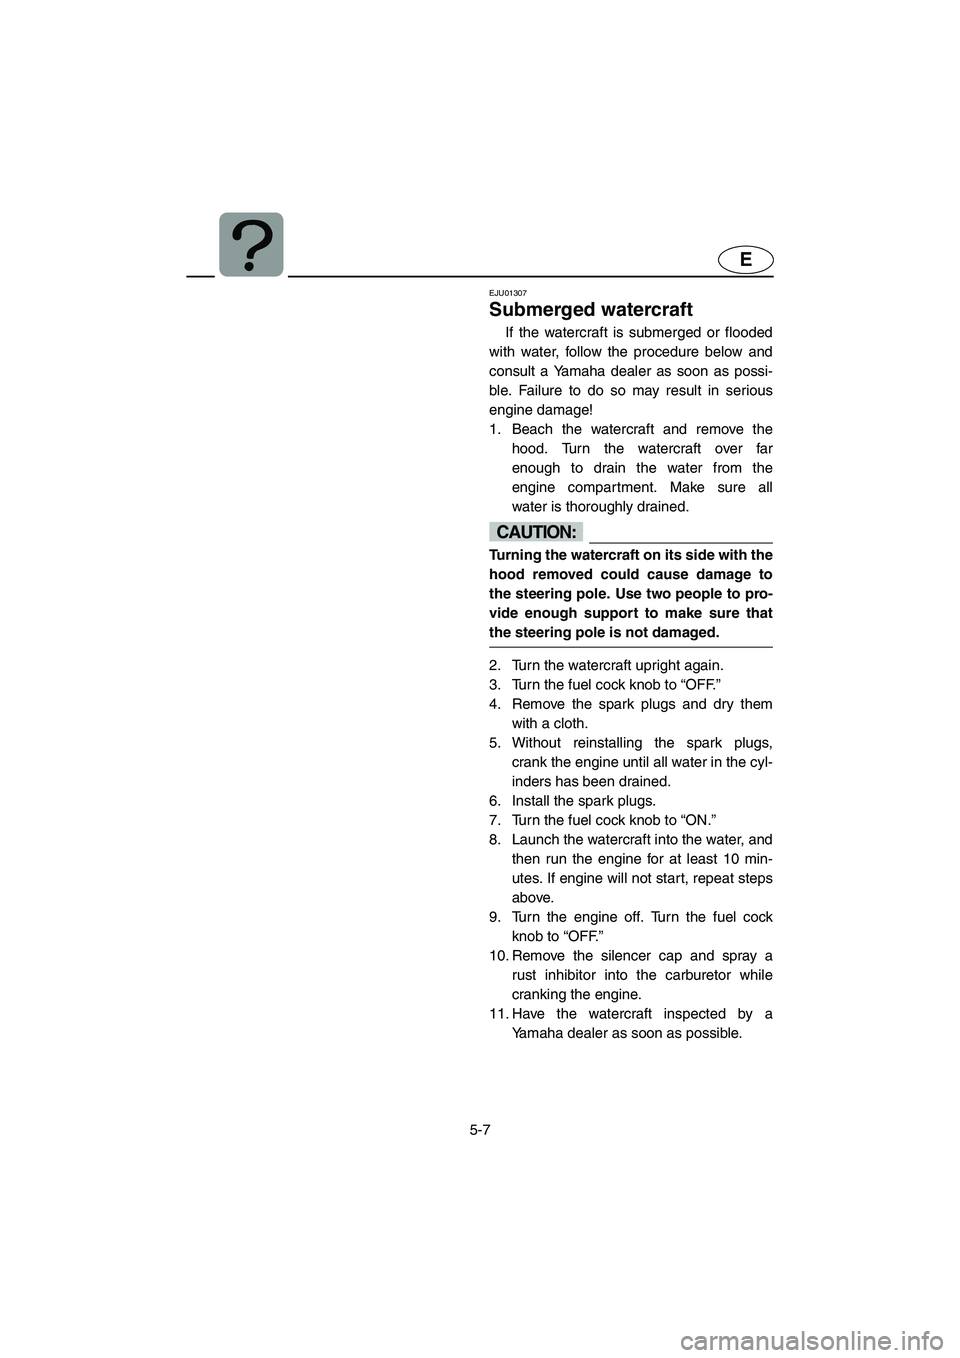 YAMAHA SUPERJET 2002  Owners Manual 5-7
E
EJU01307 
Submerged watercraft  
If the watercraft is submerged or flooded
with water, follow the procedure below and
consult a Yamaha dealer as soon as possi-
ble. Failure to do so may result i